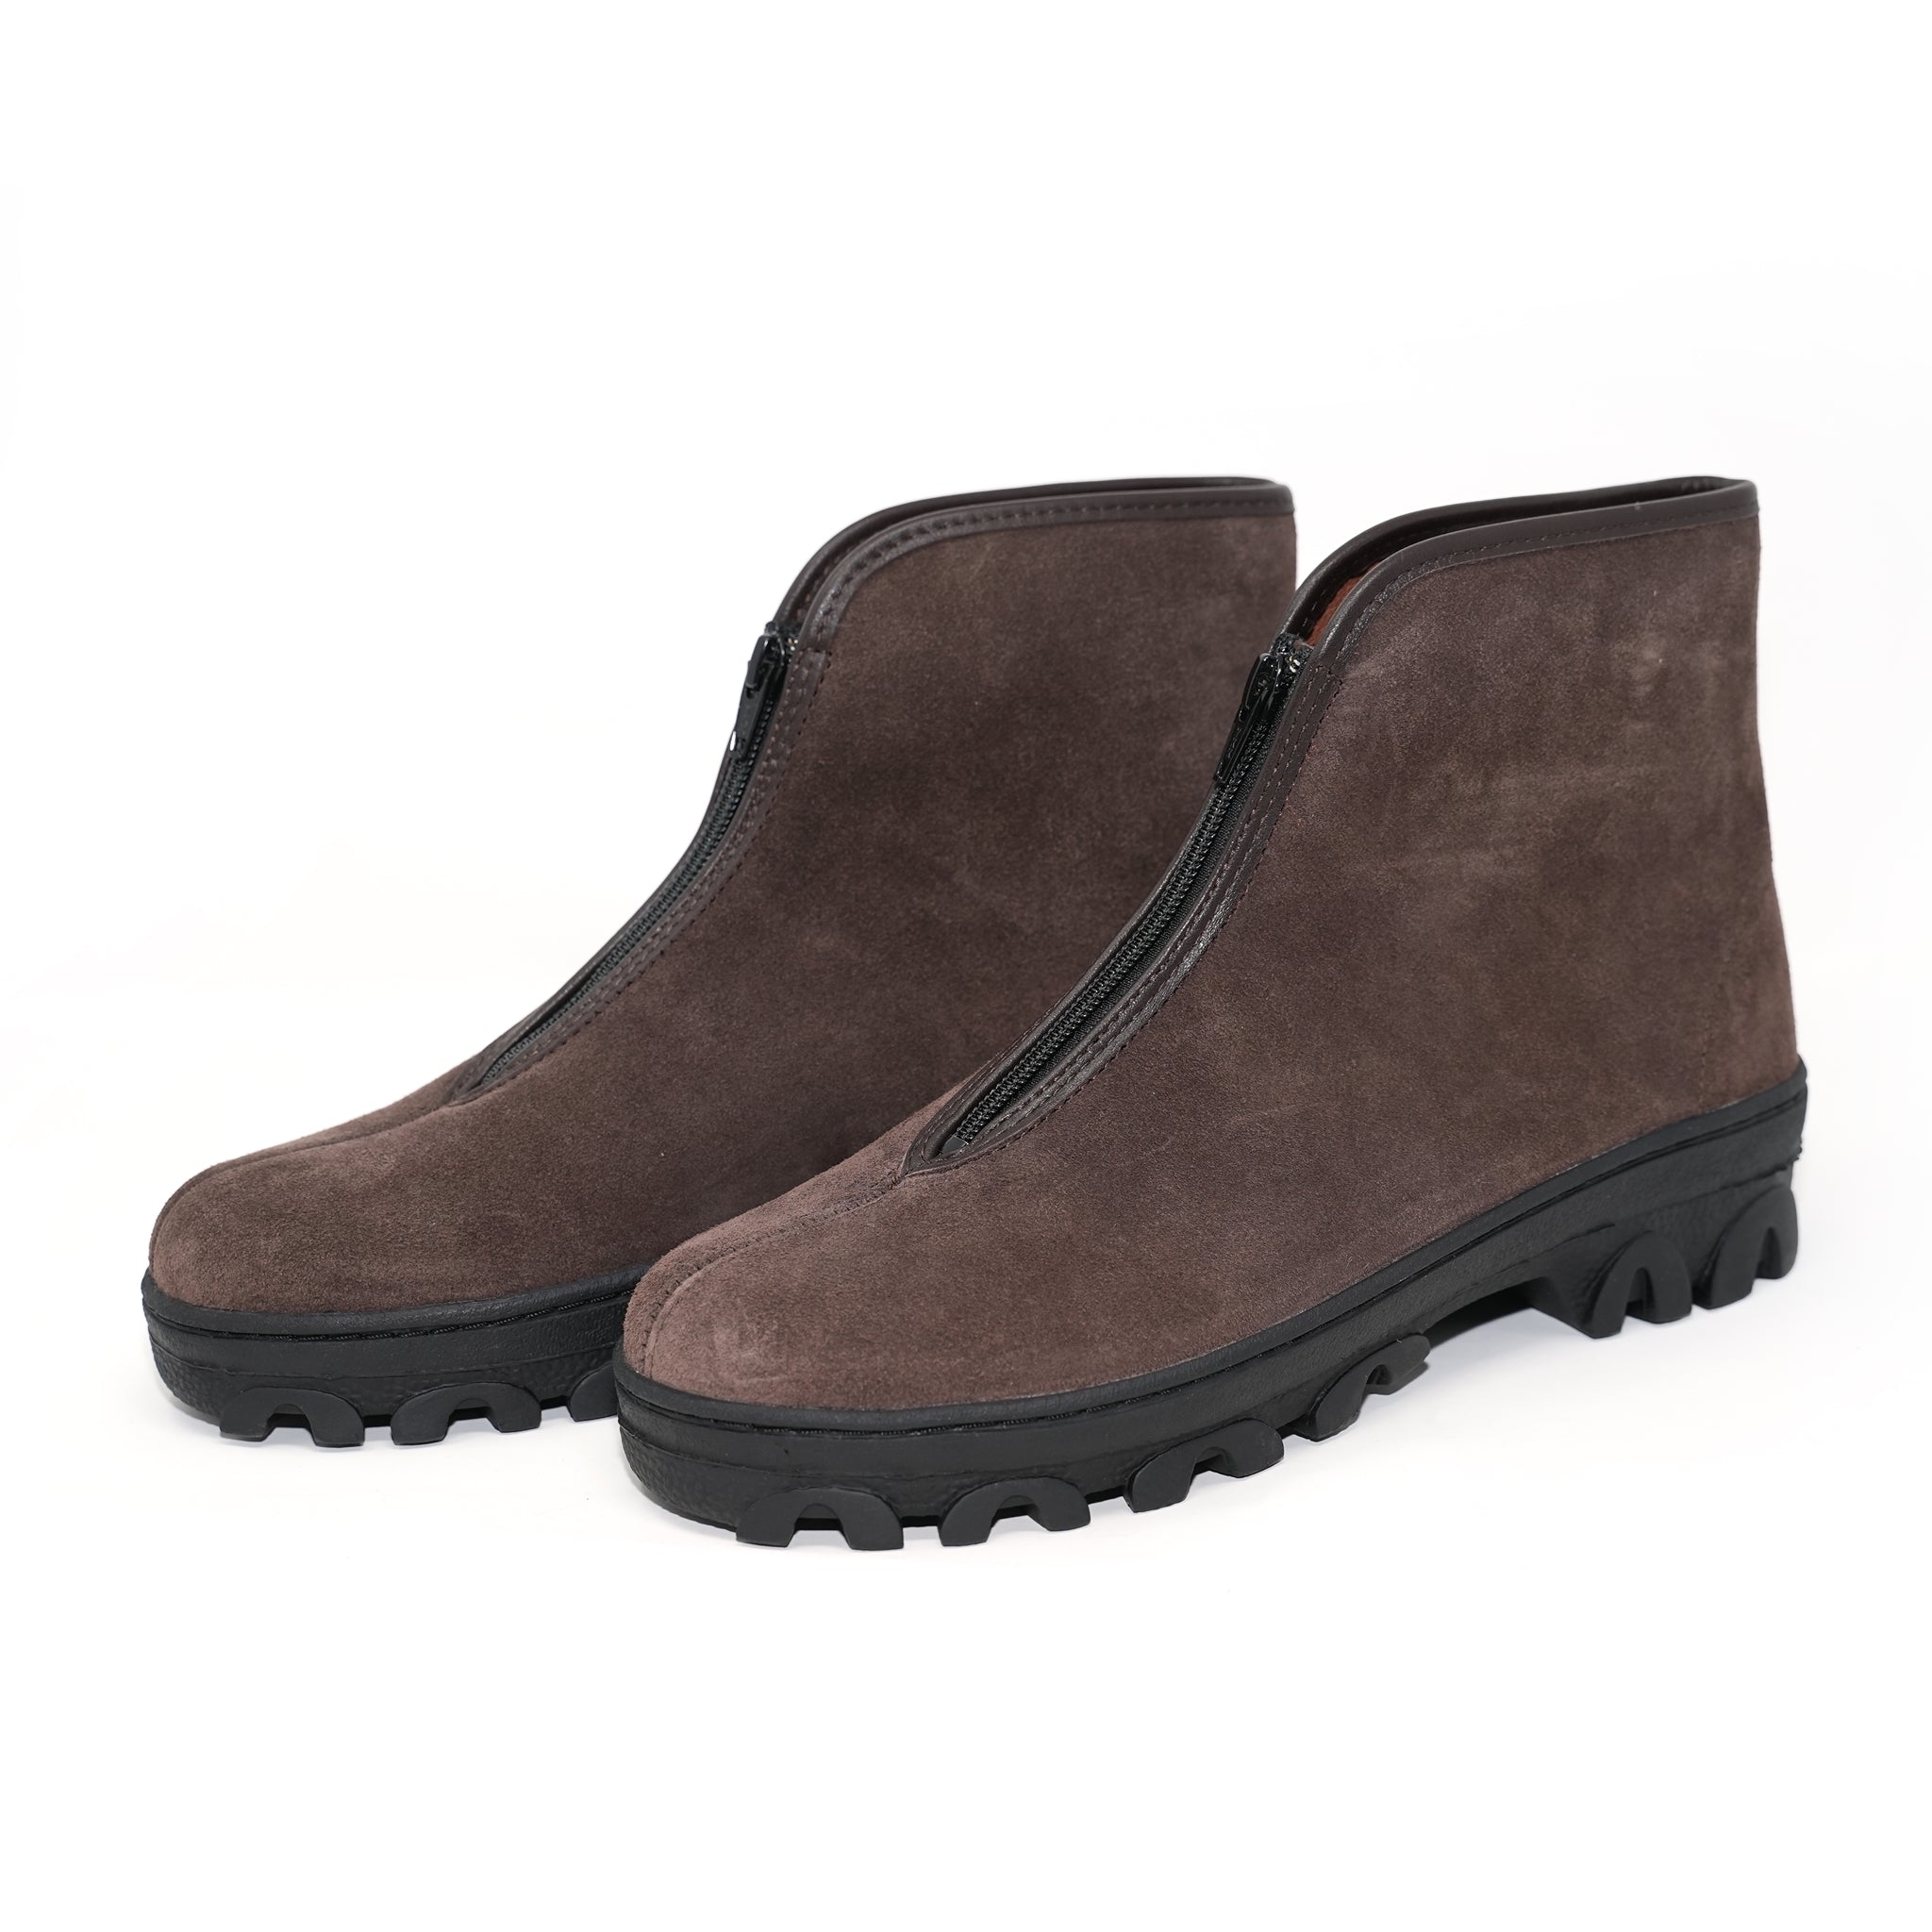 No:540SSA | Name:RUSSIAN MILITARY BOOTS | Color:Dark Brown Suede